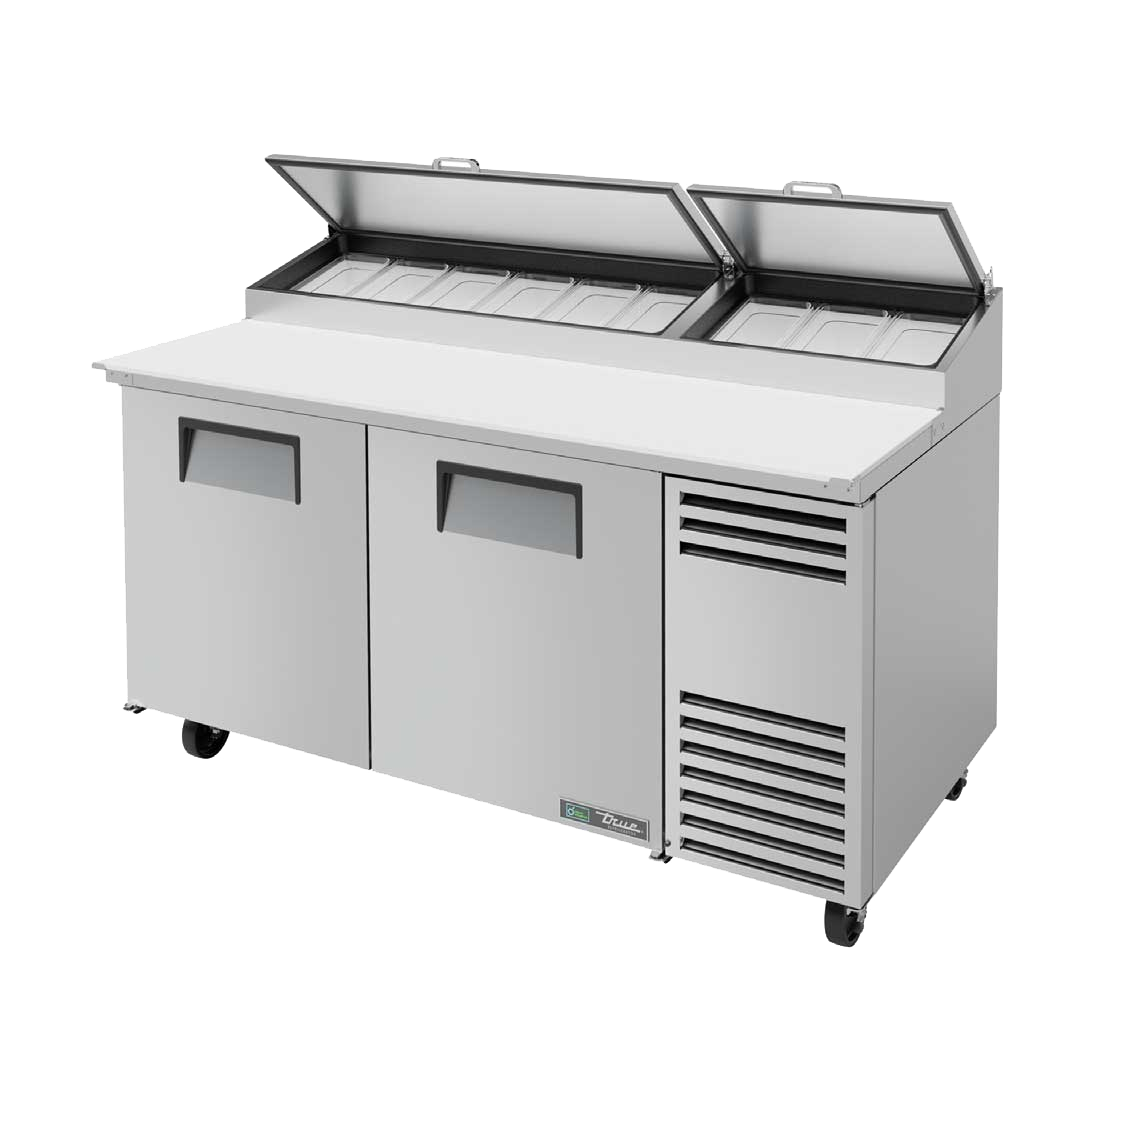 superior-equipment-supply - True Food Service Equipment - True Stainless Steel Two Section 67"W Pizza Prep Table